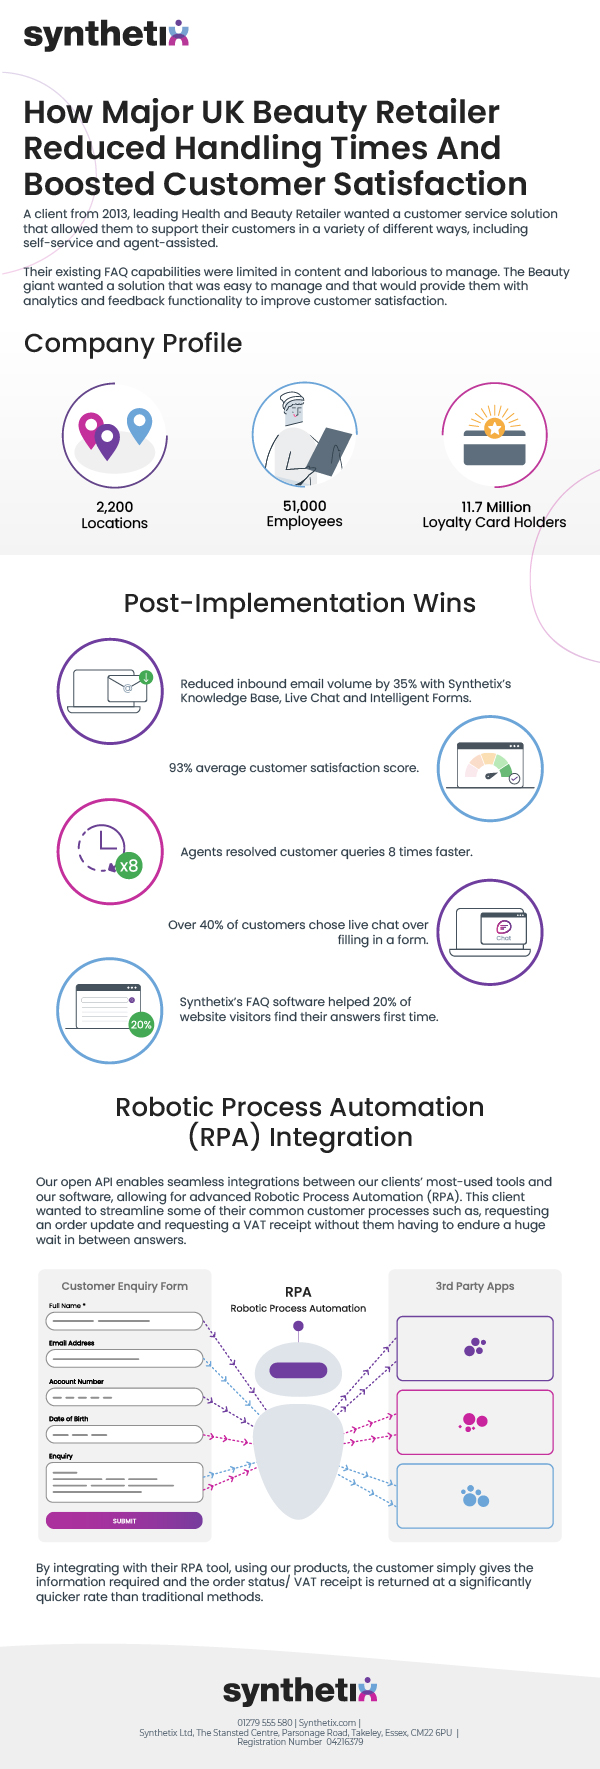 An infographic showing statistics and facts about how synthetix helped reduce handing times and boosted csat for a major beauty retailer